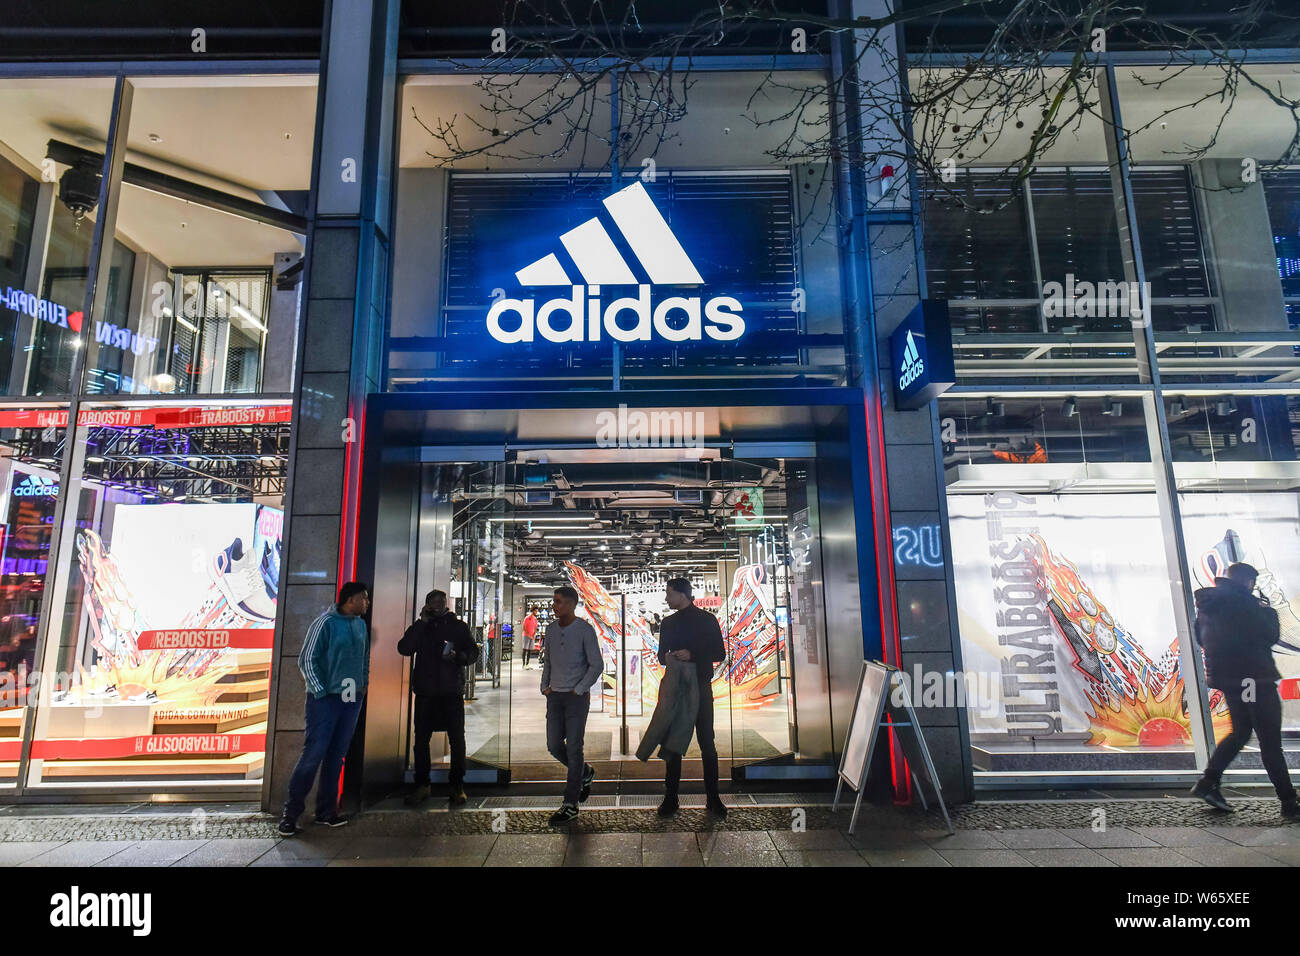 Adidas Shop Berlin Germany High Resolution Stock Photography and Images -  Alamy